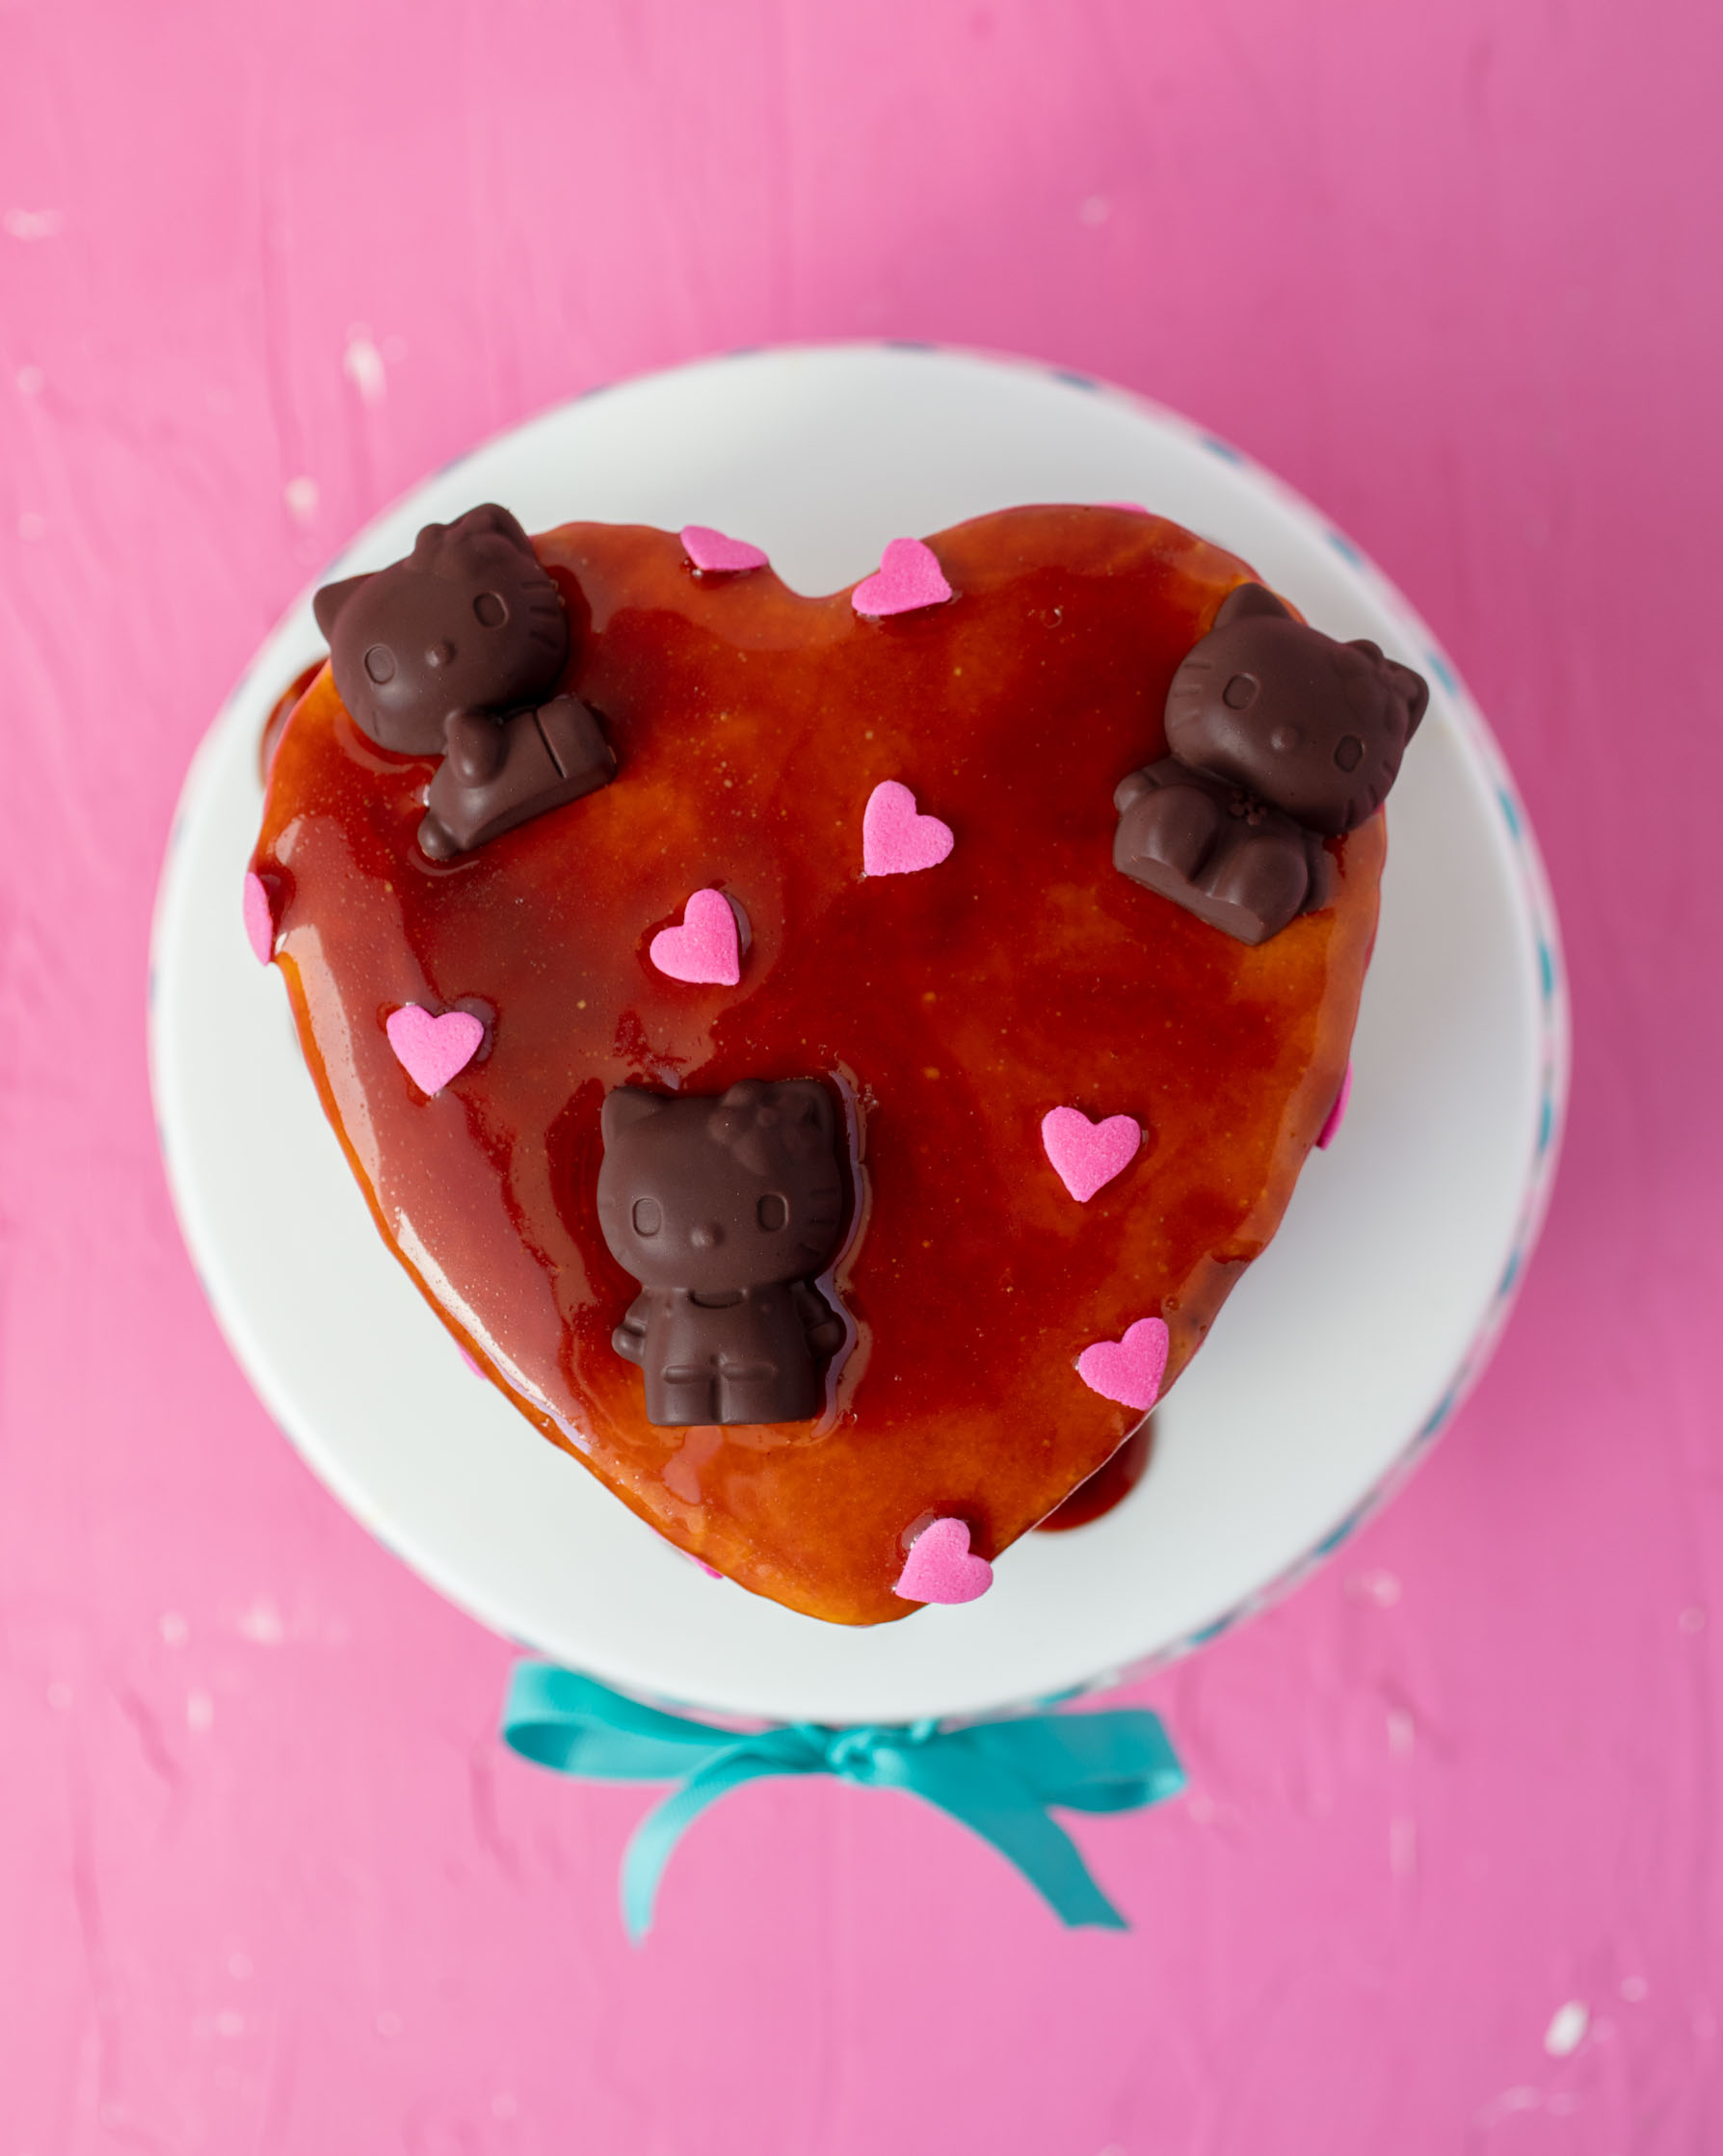 top view of the finished vegan chocolate caramel heart cake